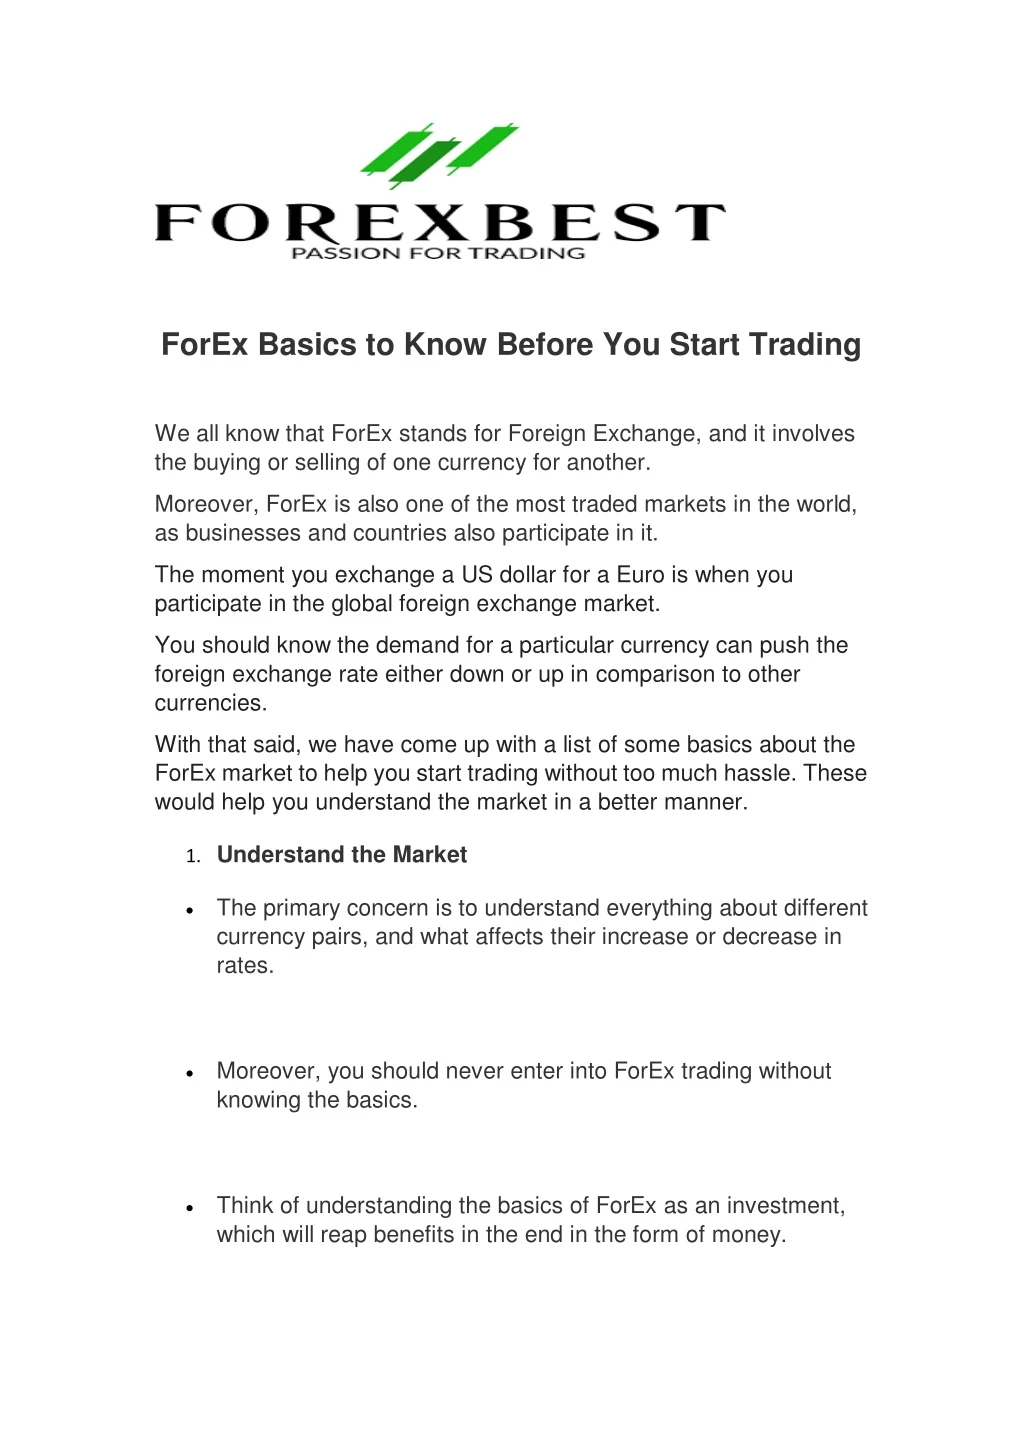 forex basics to know before you start trading